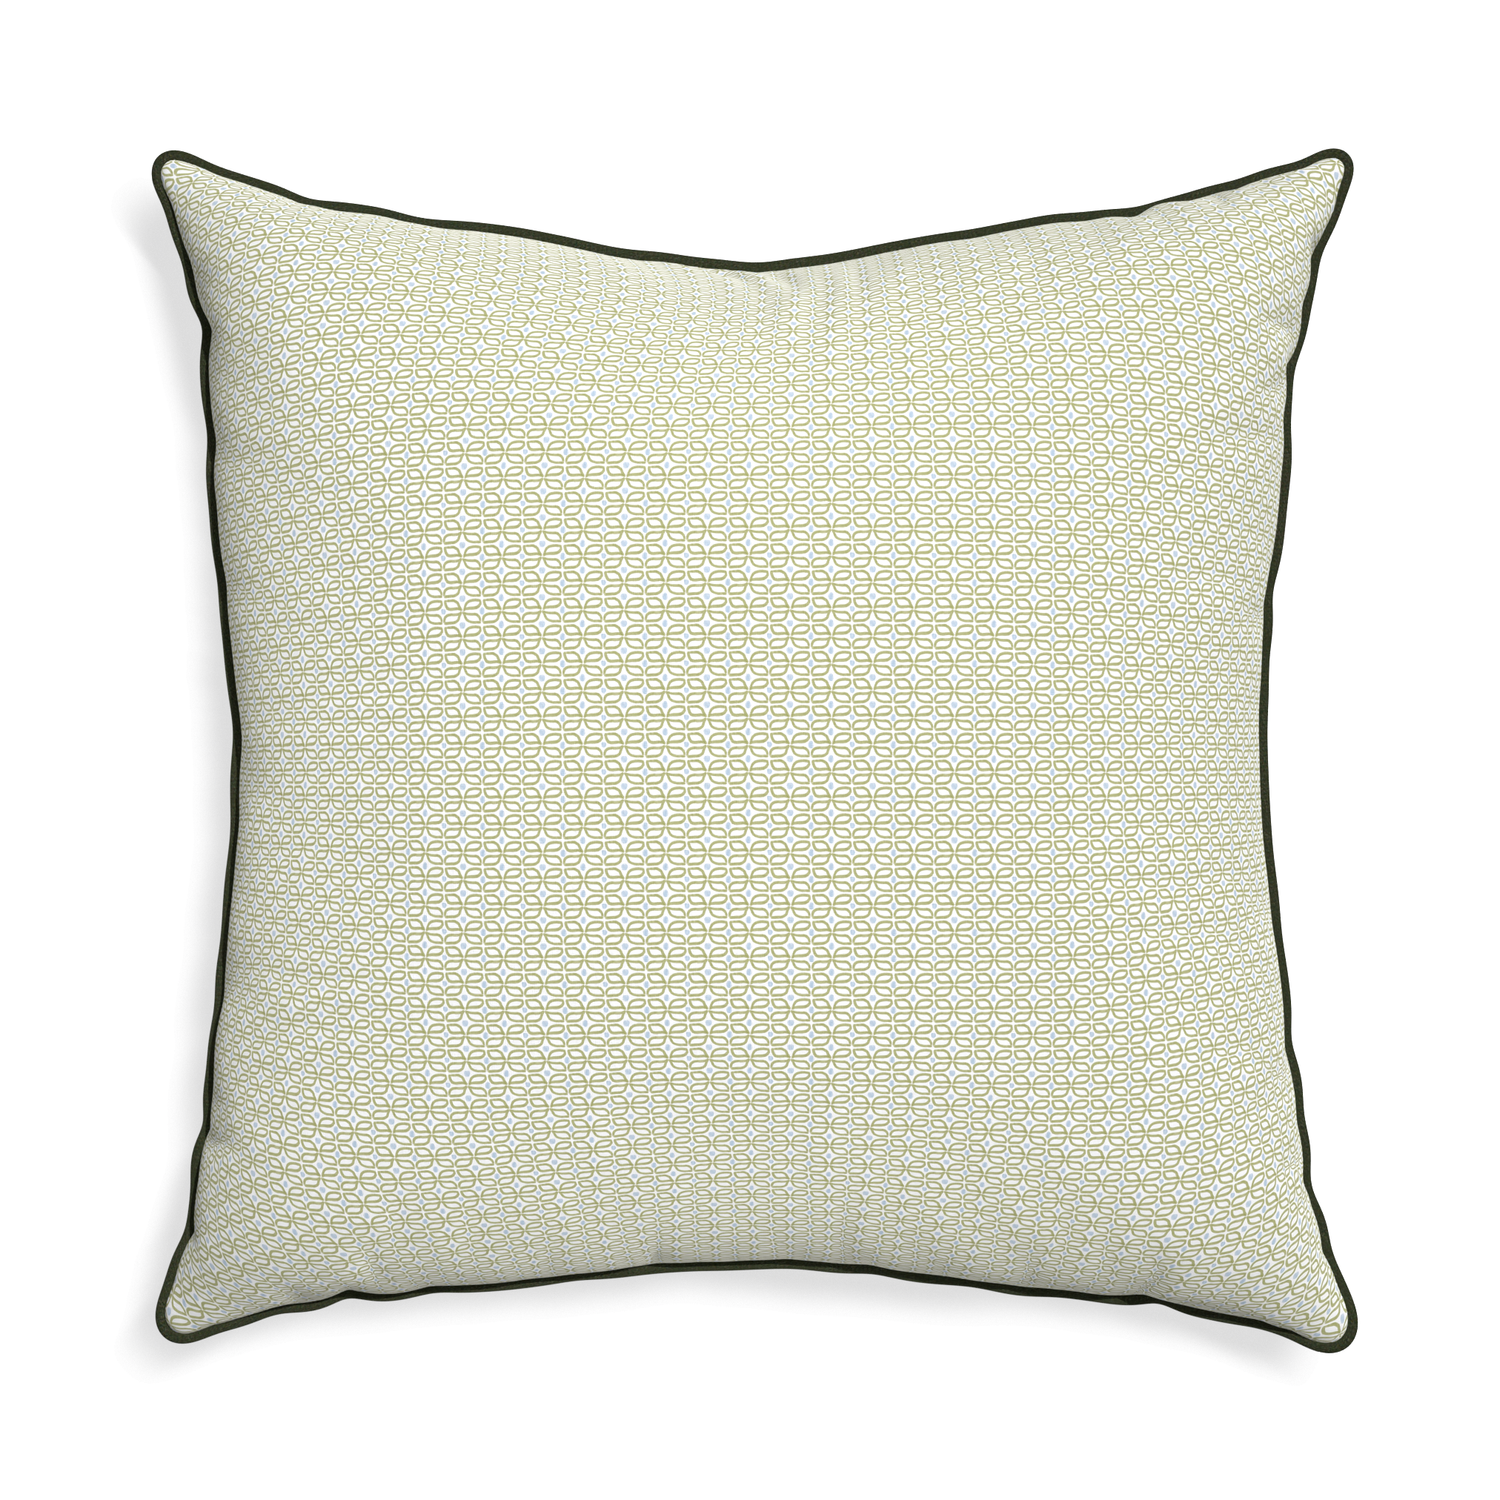 Euro-sham loomi moss custom moss green geometricpillow with f piping on white background